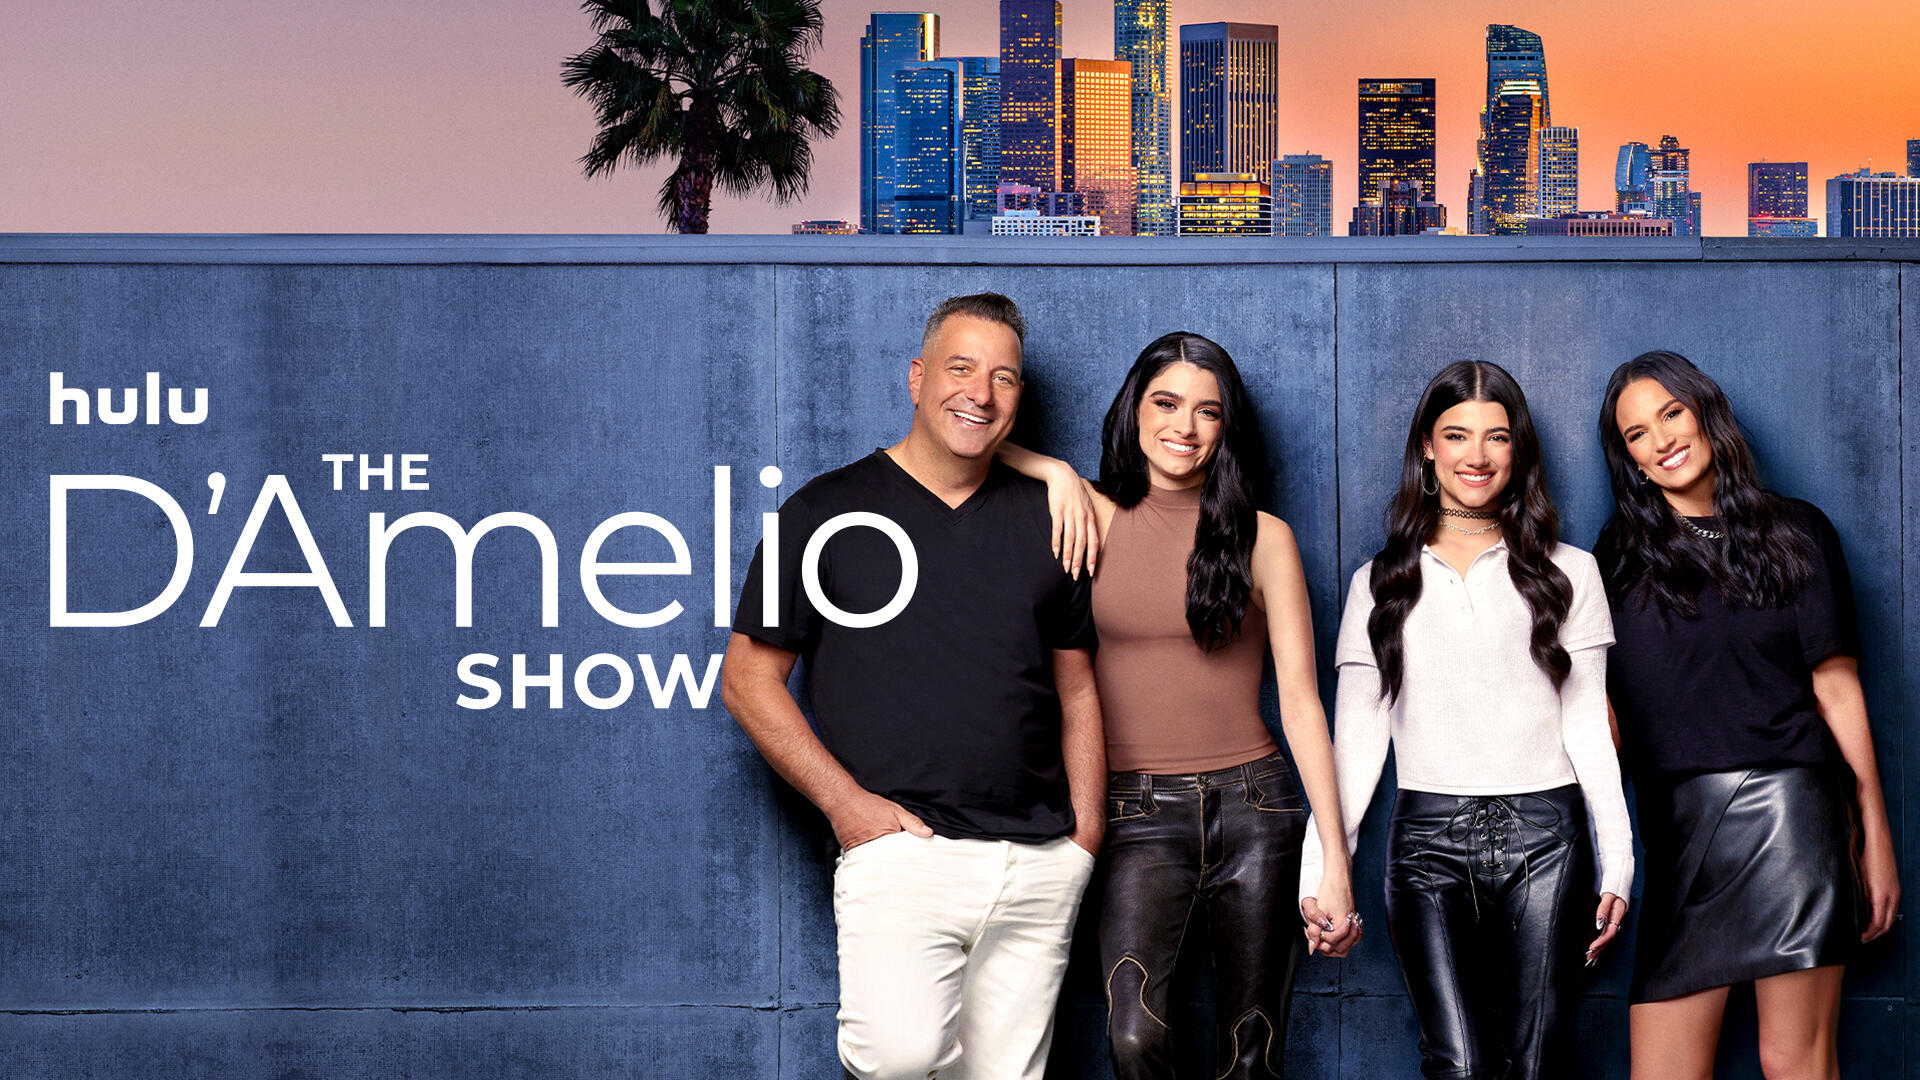 The Damelio Show -- Season 2 -- As personal and professional relationships overlap, the D’Amelio family faces new challenges at every turn, from public scandals to maintaining mental health, as they share the truth behind their online lives. Marc D’Amelio, Heidi D’Amelio, Dixie D’Amelio and Charli D’Amelio, shown. (Courtesy of Hulu)